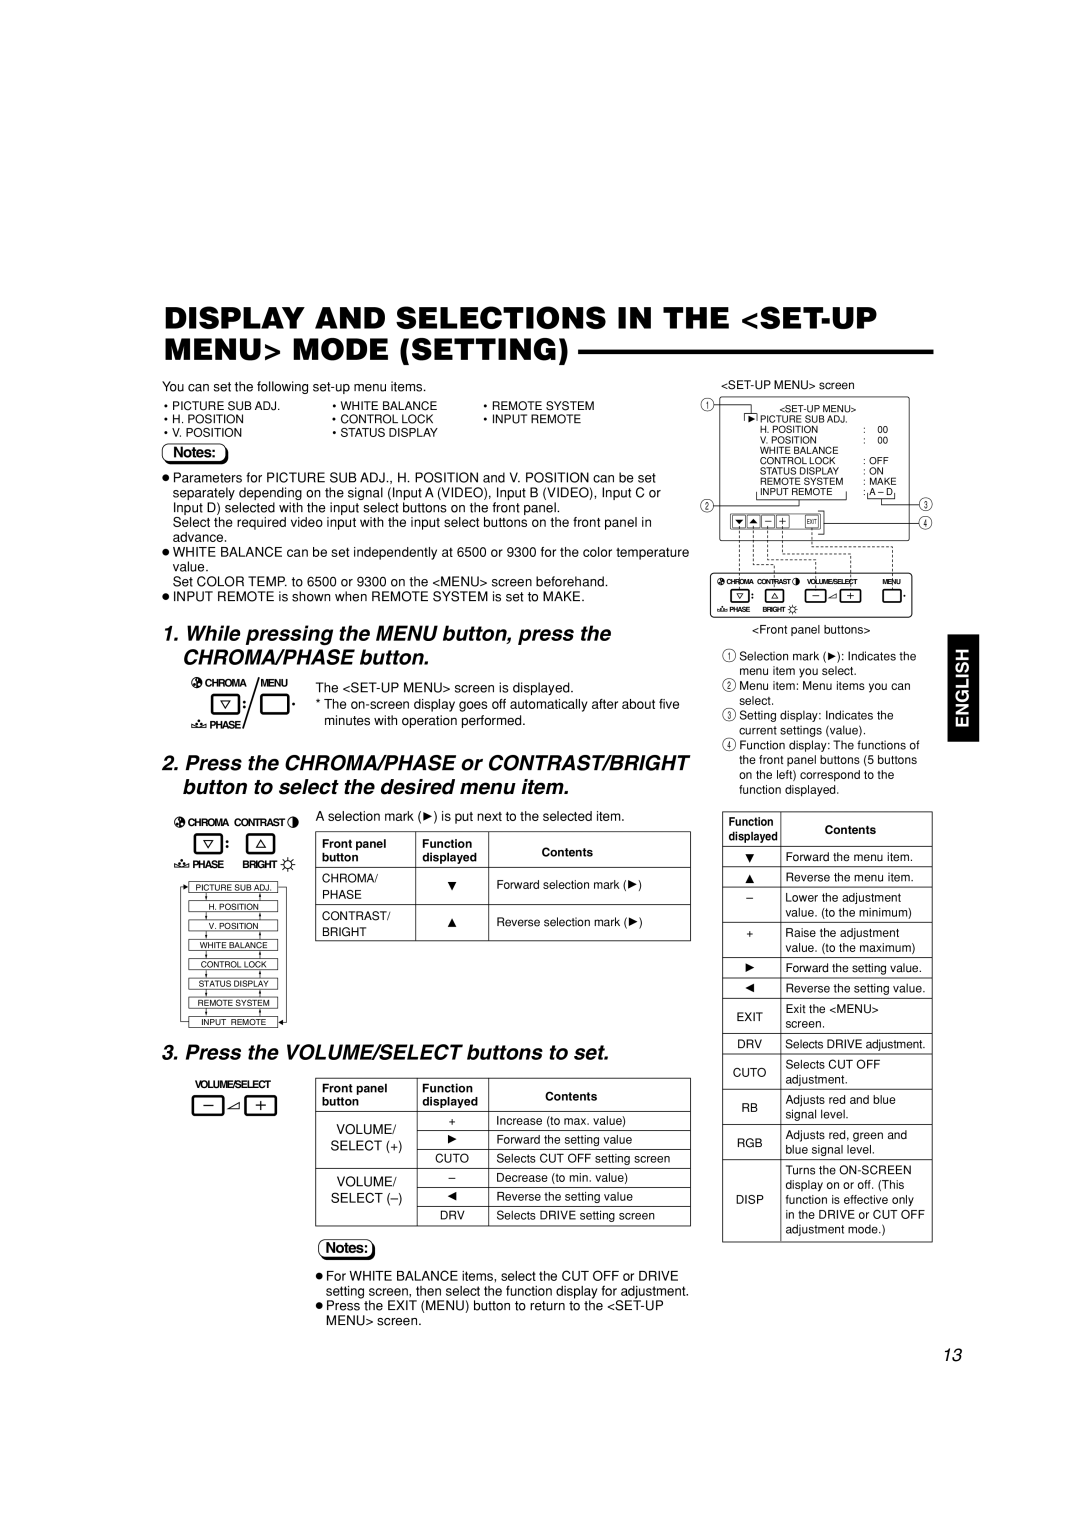 JVC TM-H1950CG manual Display and Selections in the SET-UP Menu Mode Setting, You can set the following set-up menu items 